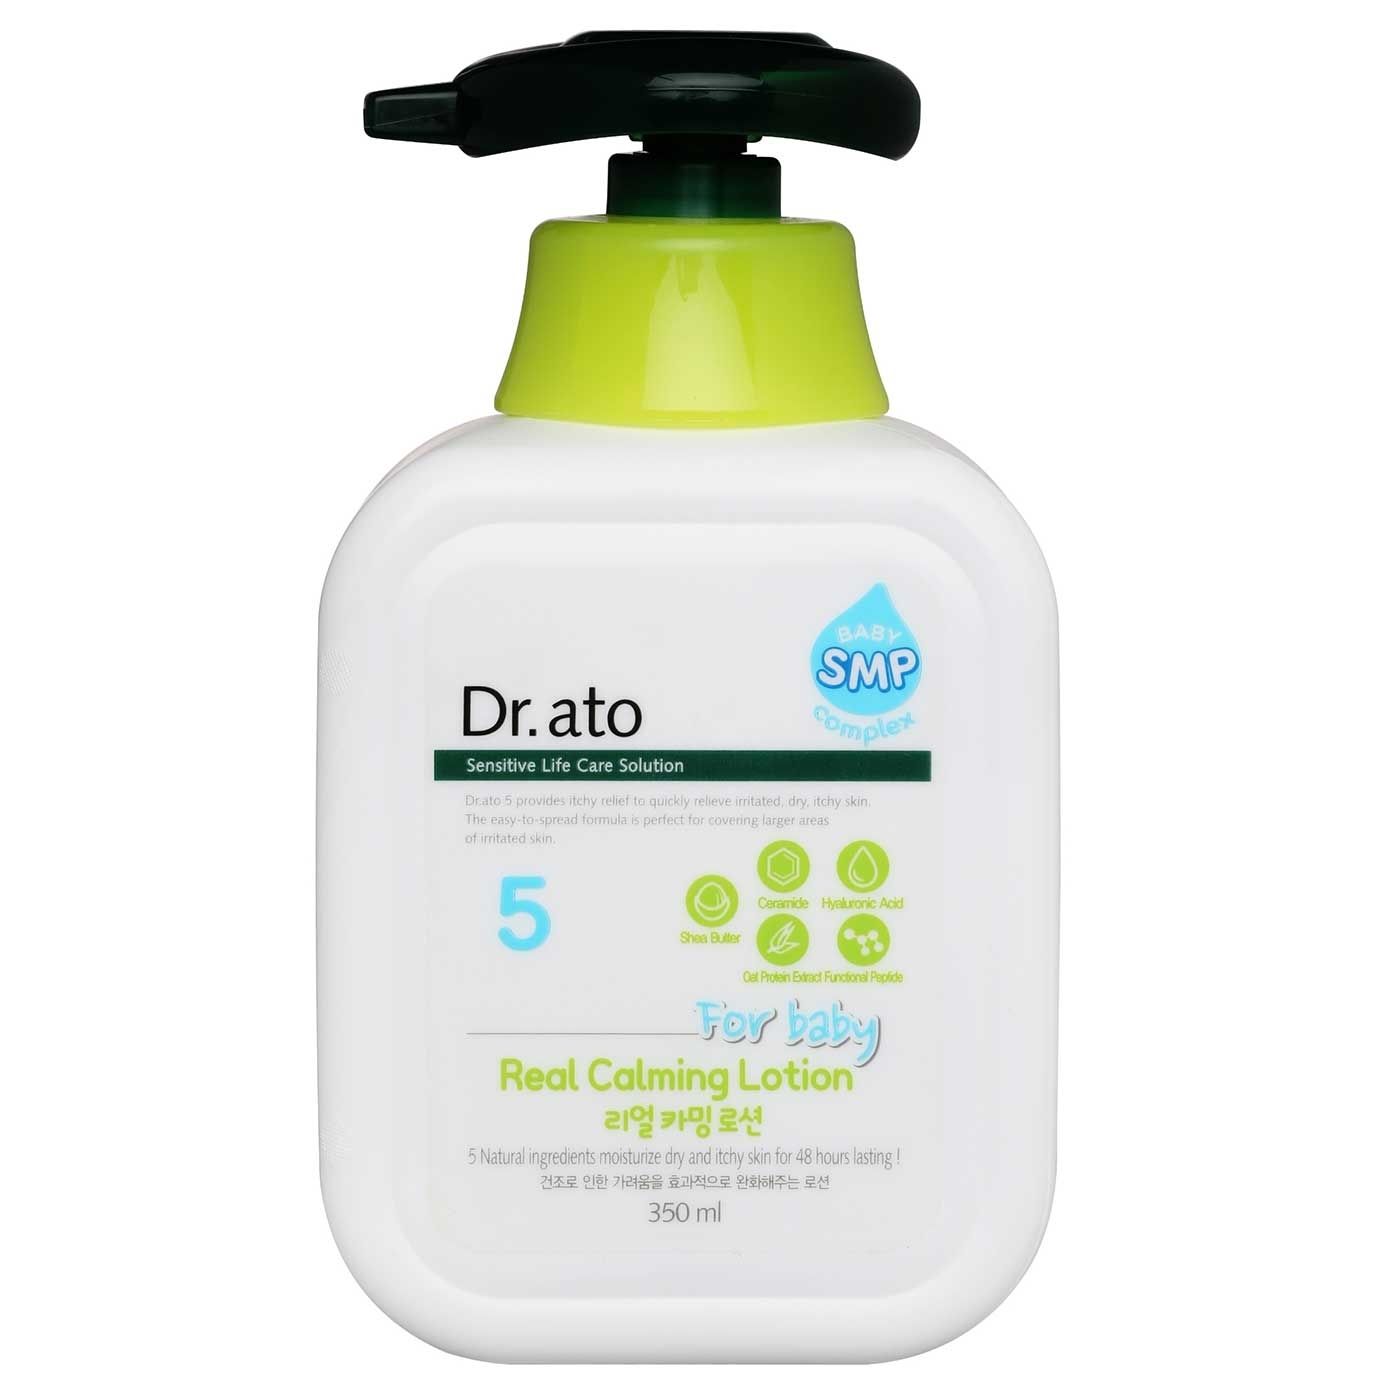 Dr.ato Real Calming Lotion 350ml - 1